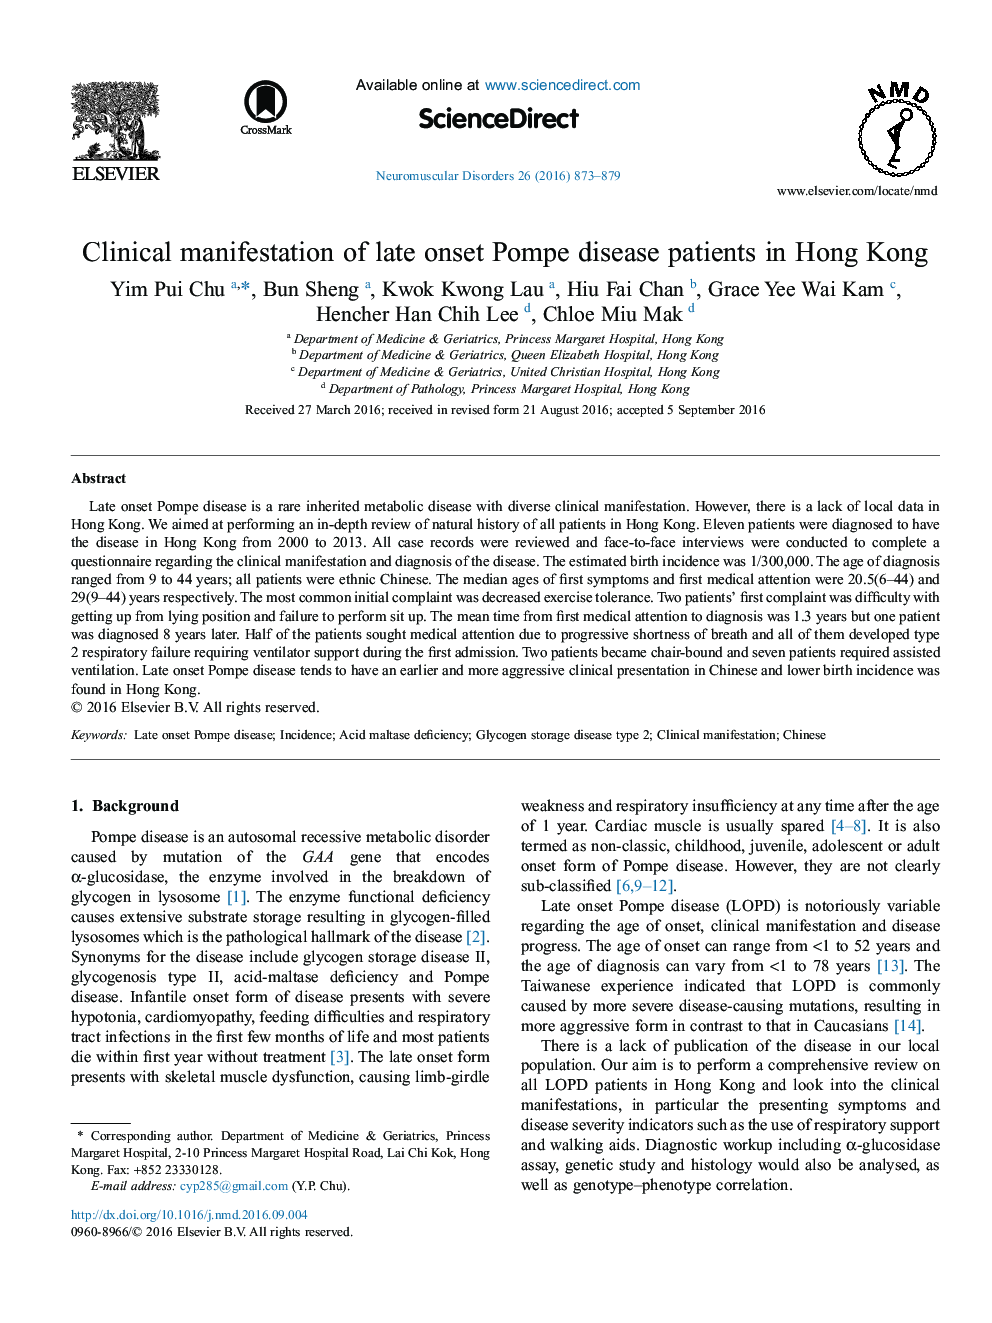 Clinical manifestation of late onset Pompe disease patients in Hong Kong